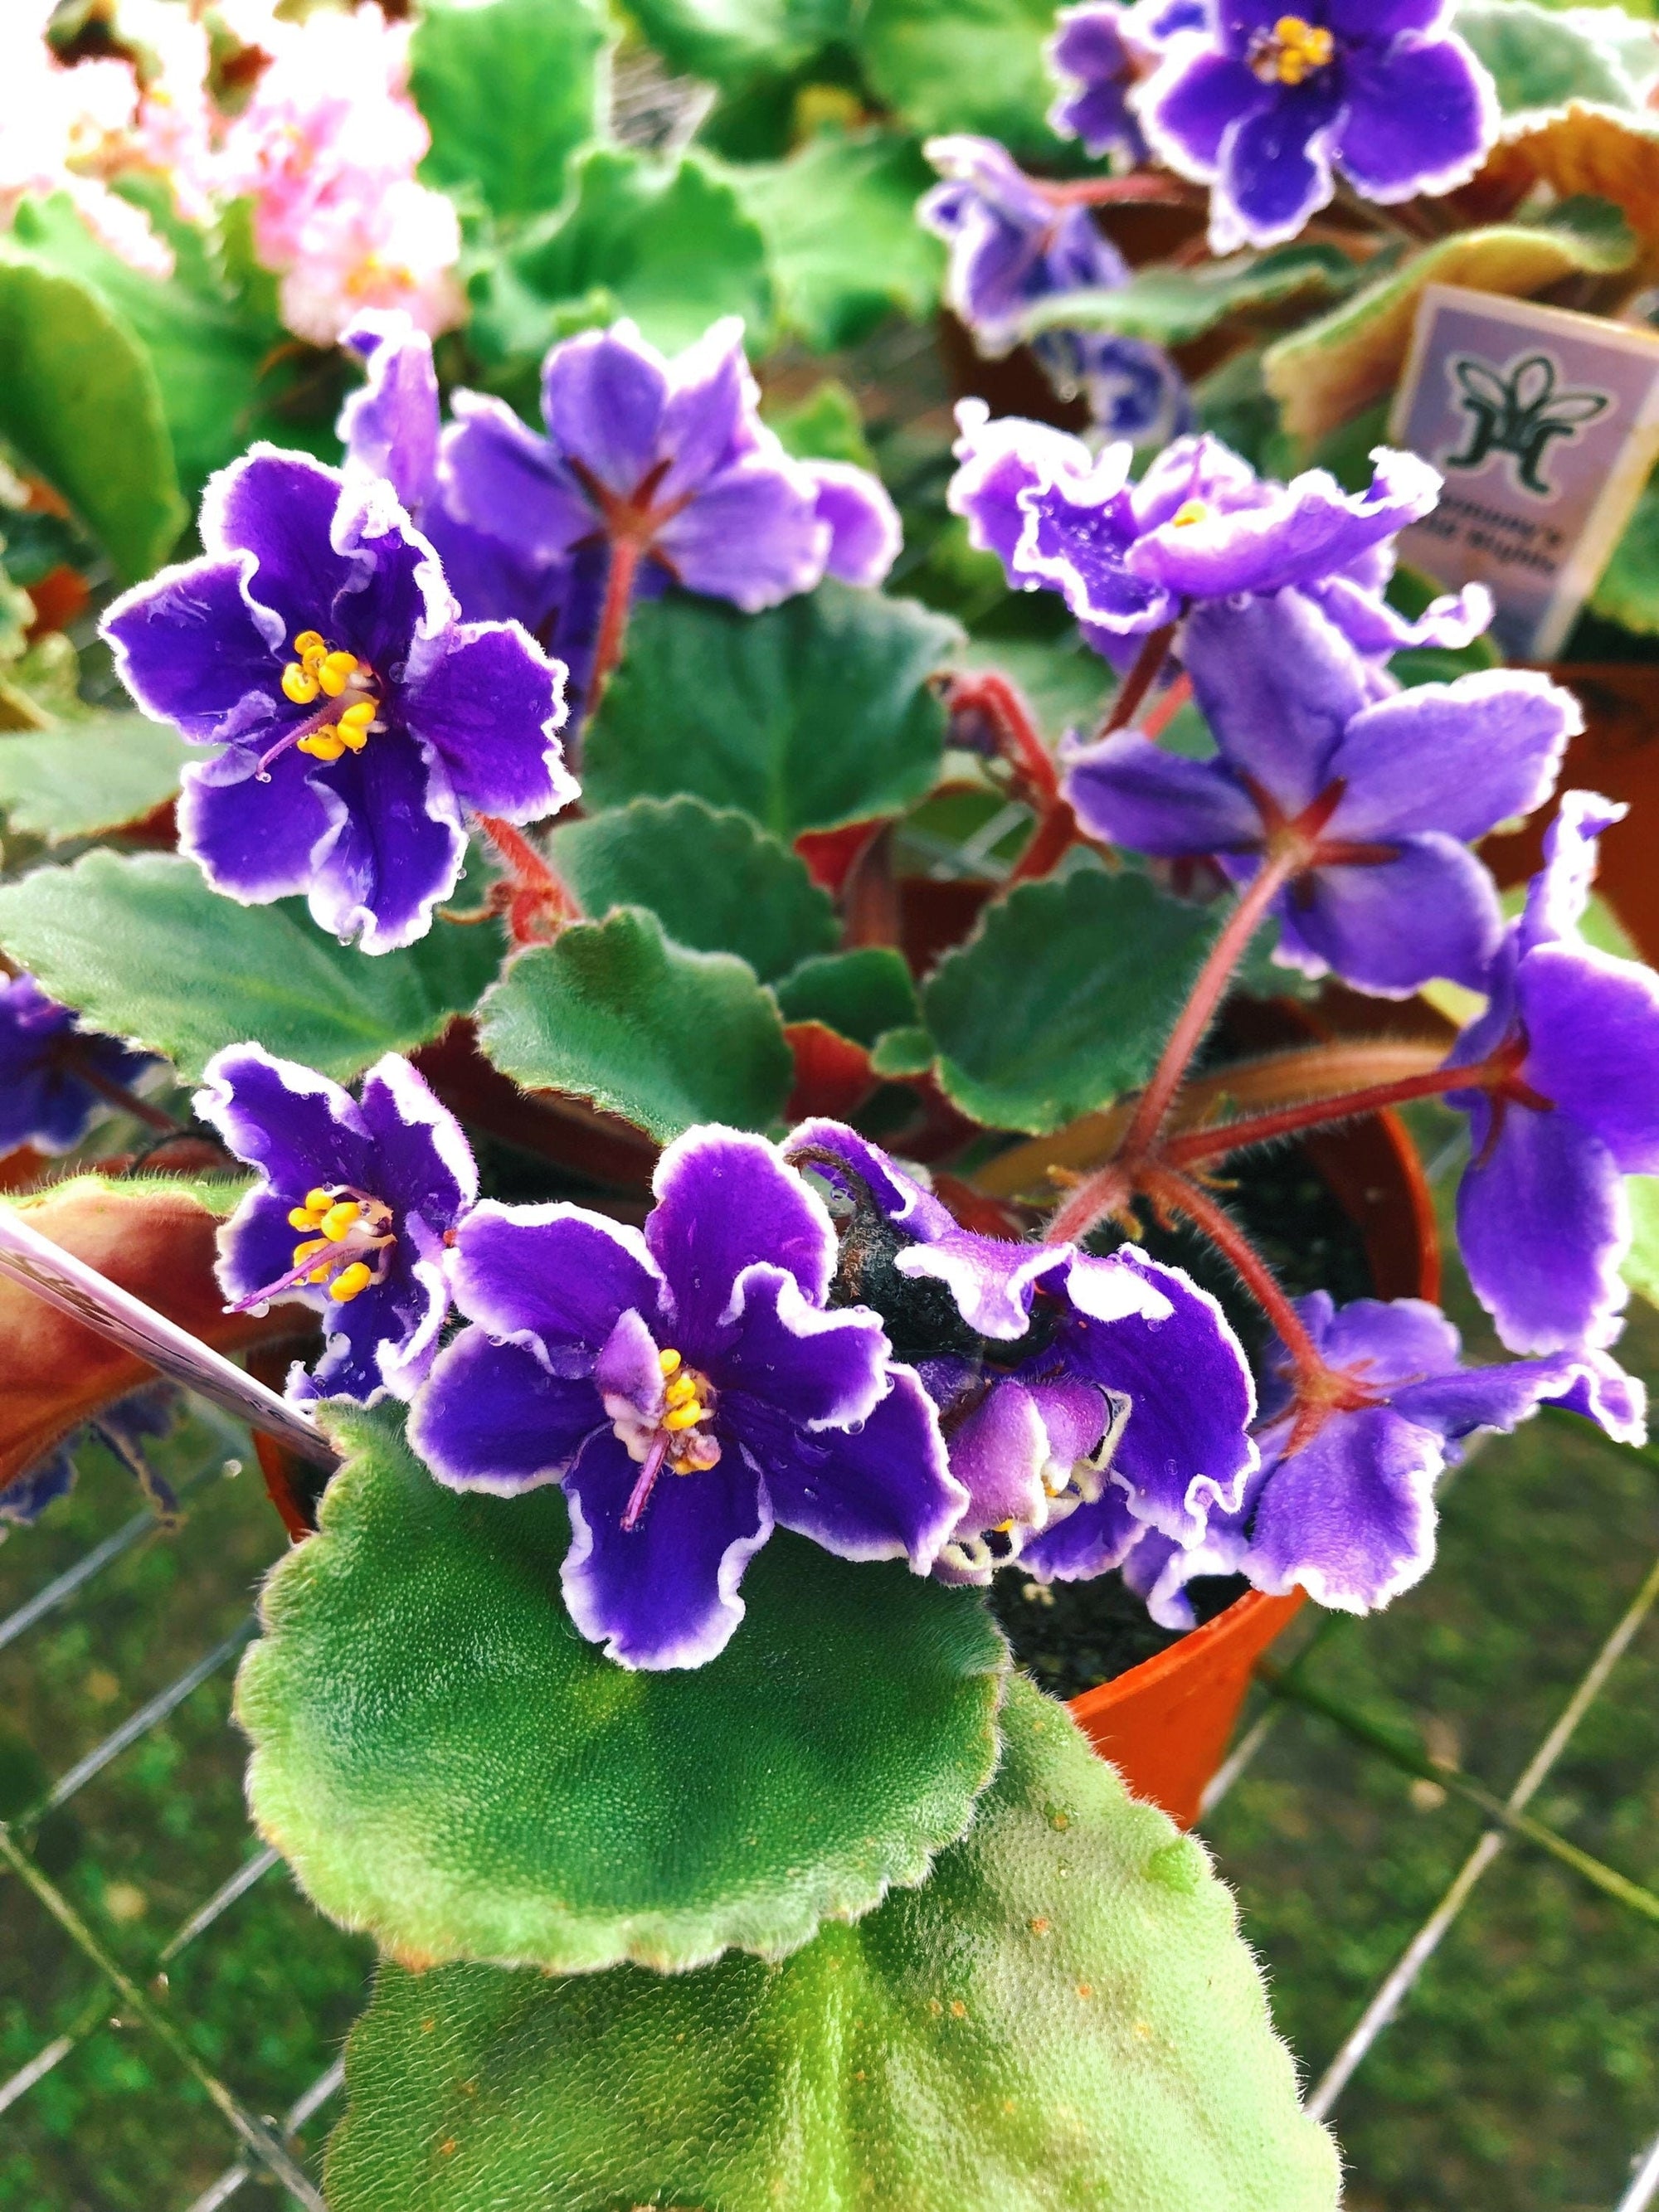 Live house plant variegated chimera bloom African Violet Harmonys Wild Nights garden 4 flower Potted gift